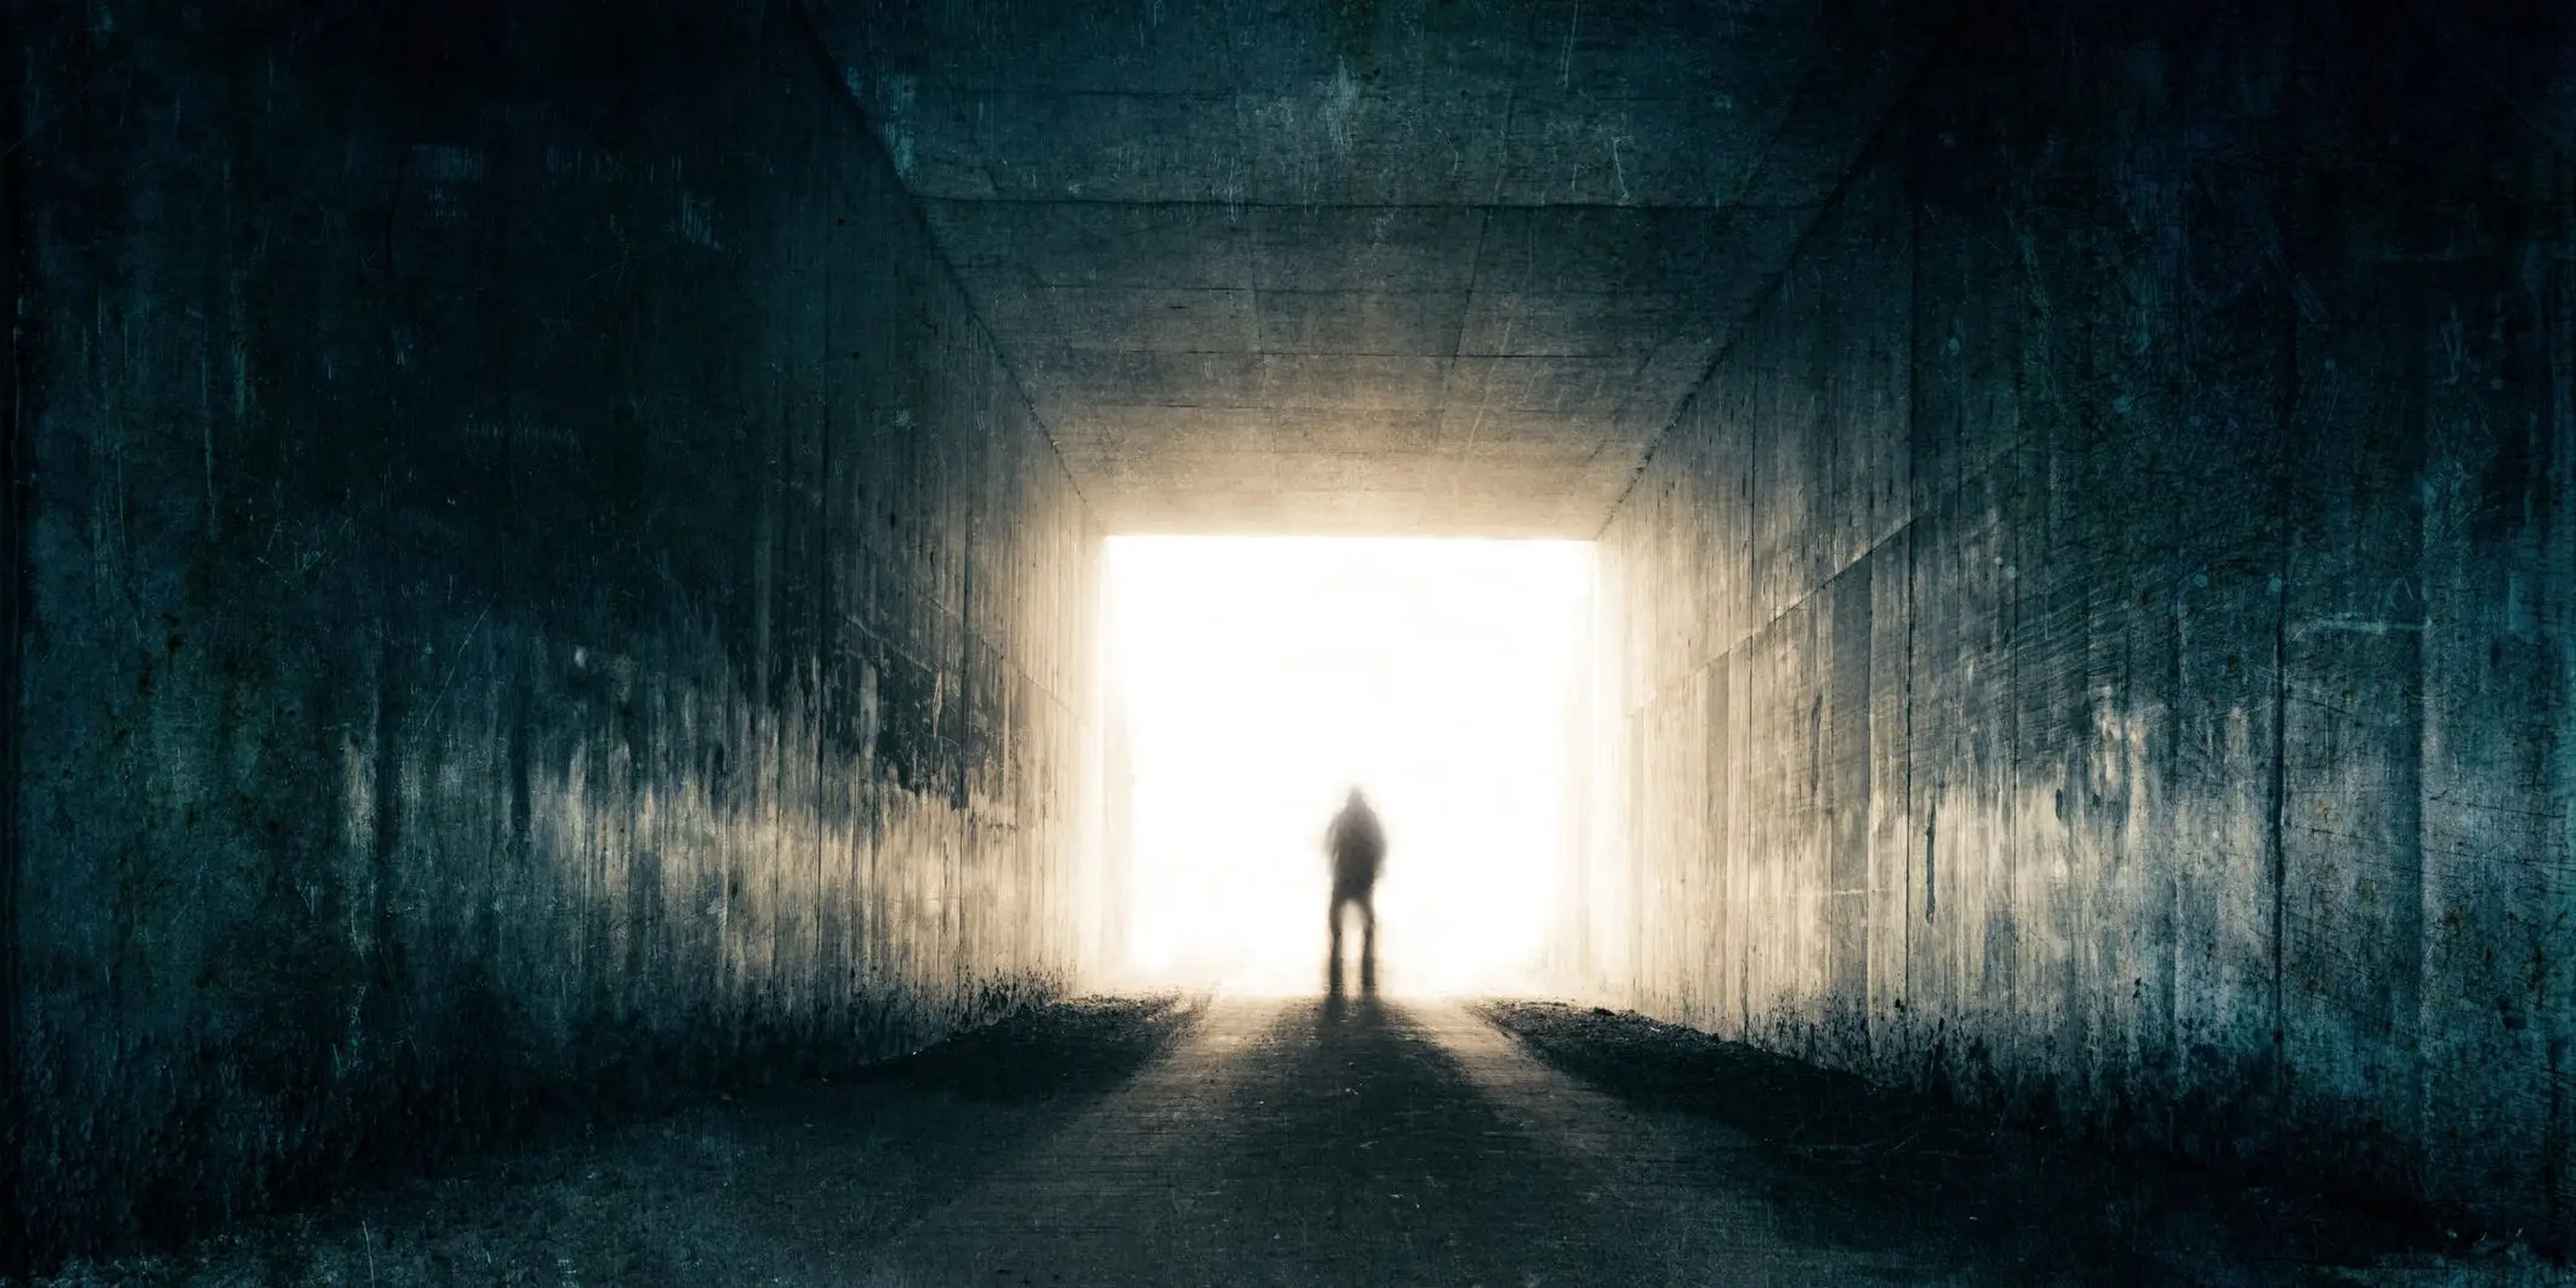 A blurred, threatening figure emerges from the light at the end of a dark sinister tunnel.